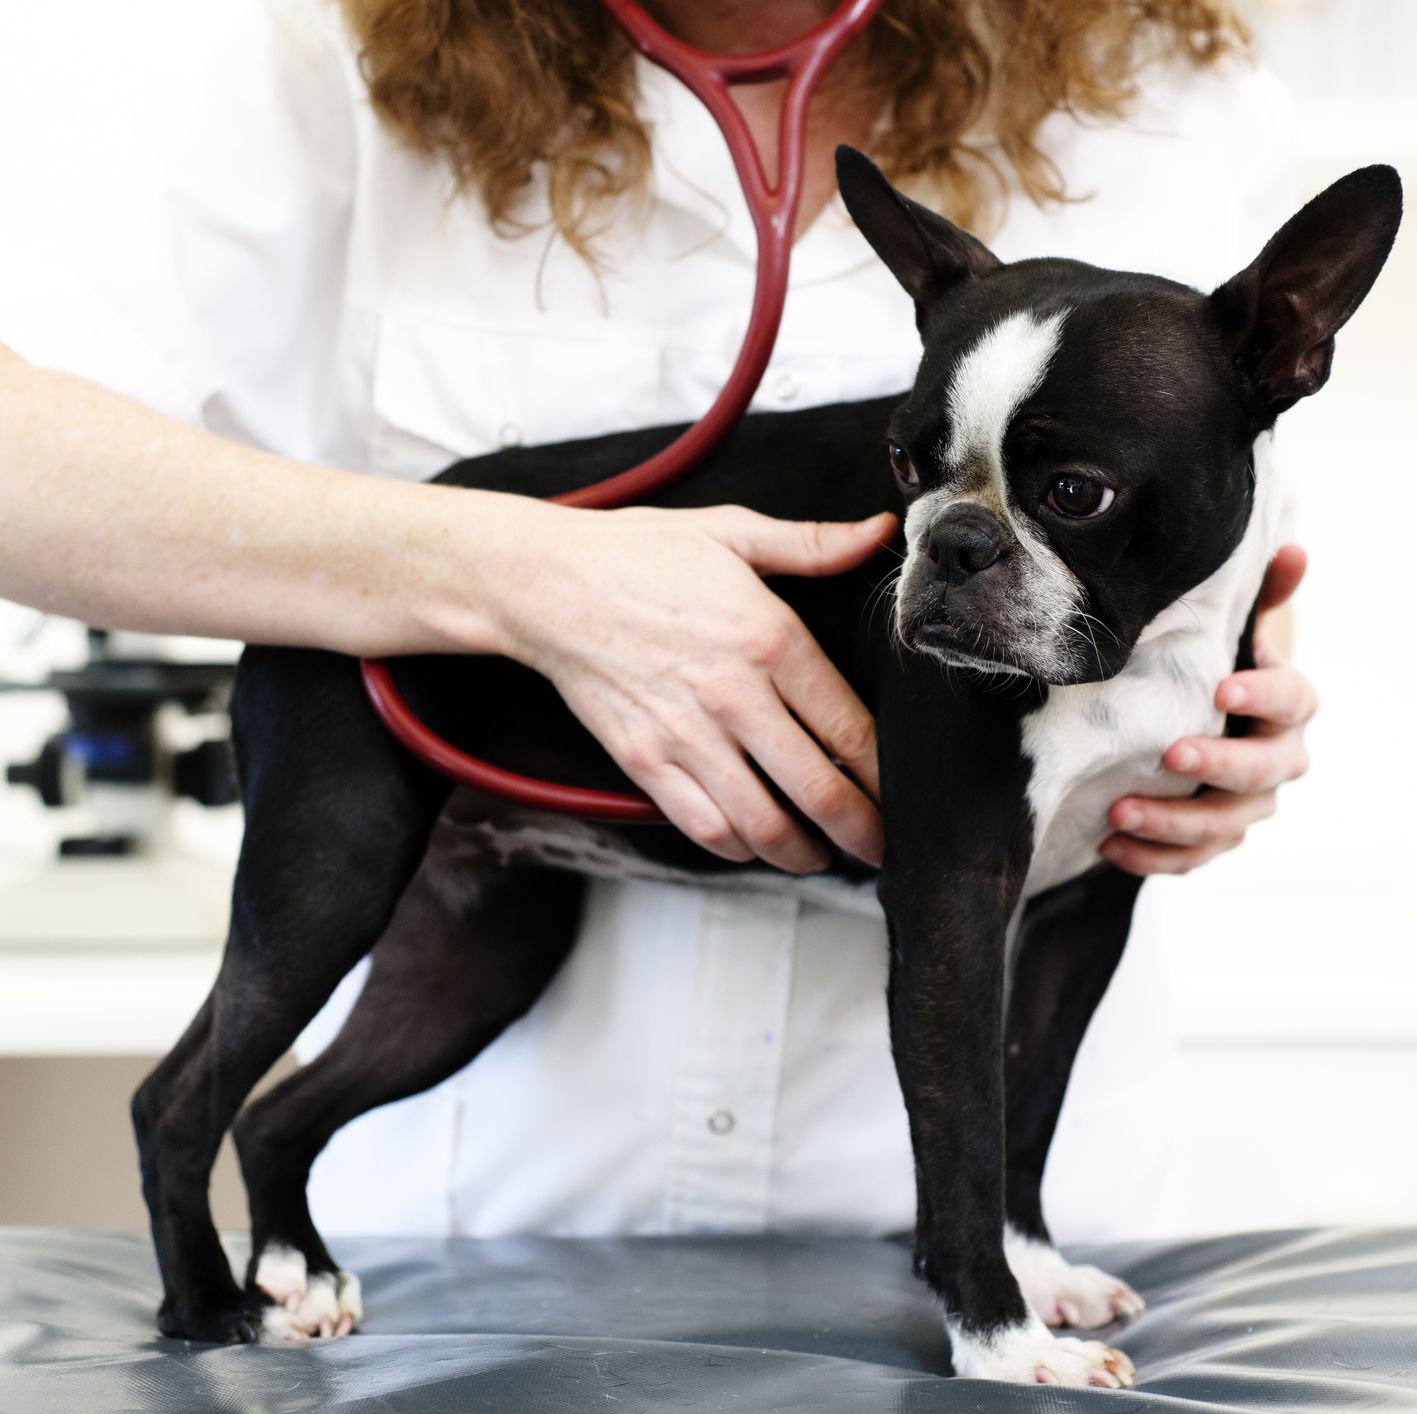 UK dog owners reveal their biggest fears when visiting the vet